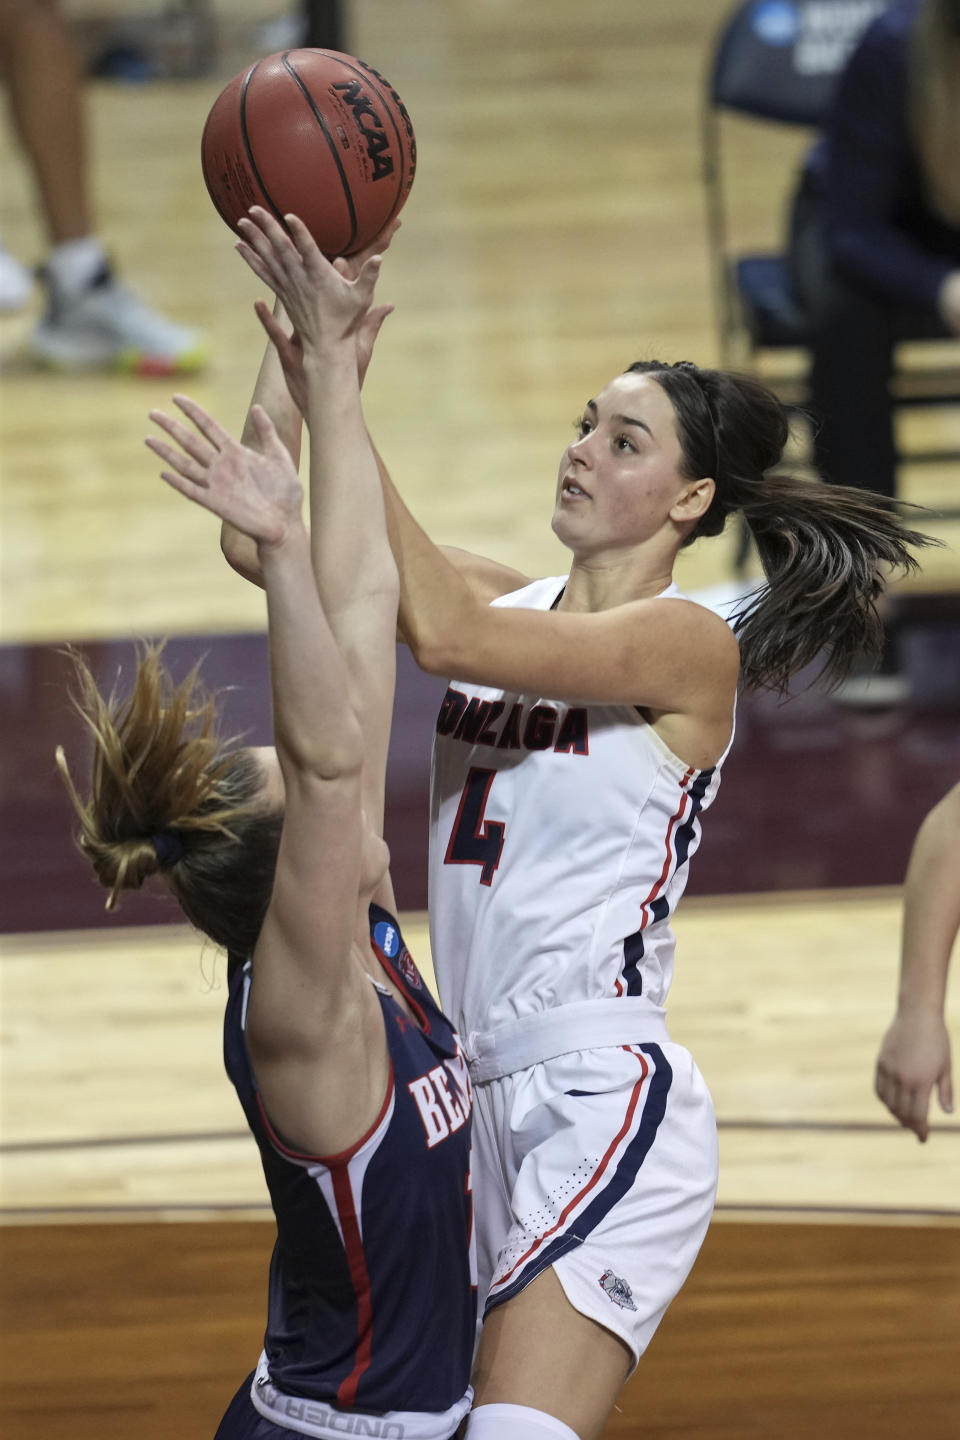 Gonzaga's LeeAnne Wirth (4) shoots against Belmont's Allison Luly, left, during the first half of a college basketball game in the first round of the women's NCAA tournament at the University Events Center in San Marcos, Texas, Monday, March 22, 2021. (AP Photo/Chuck Burton)